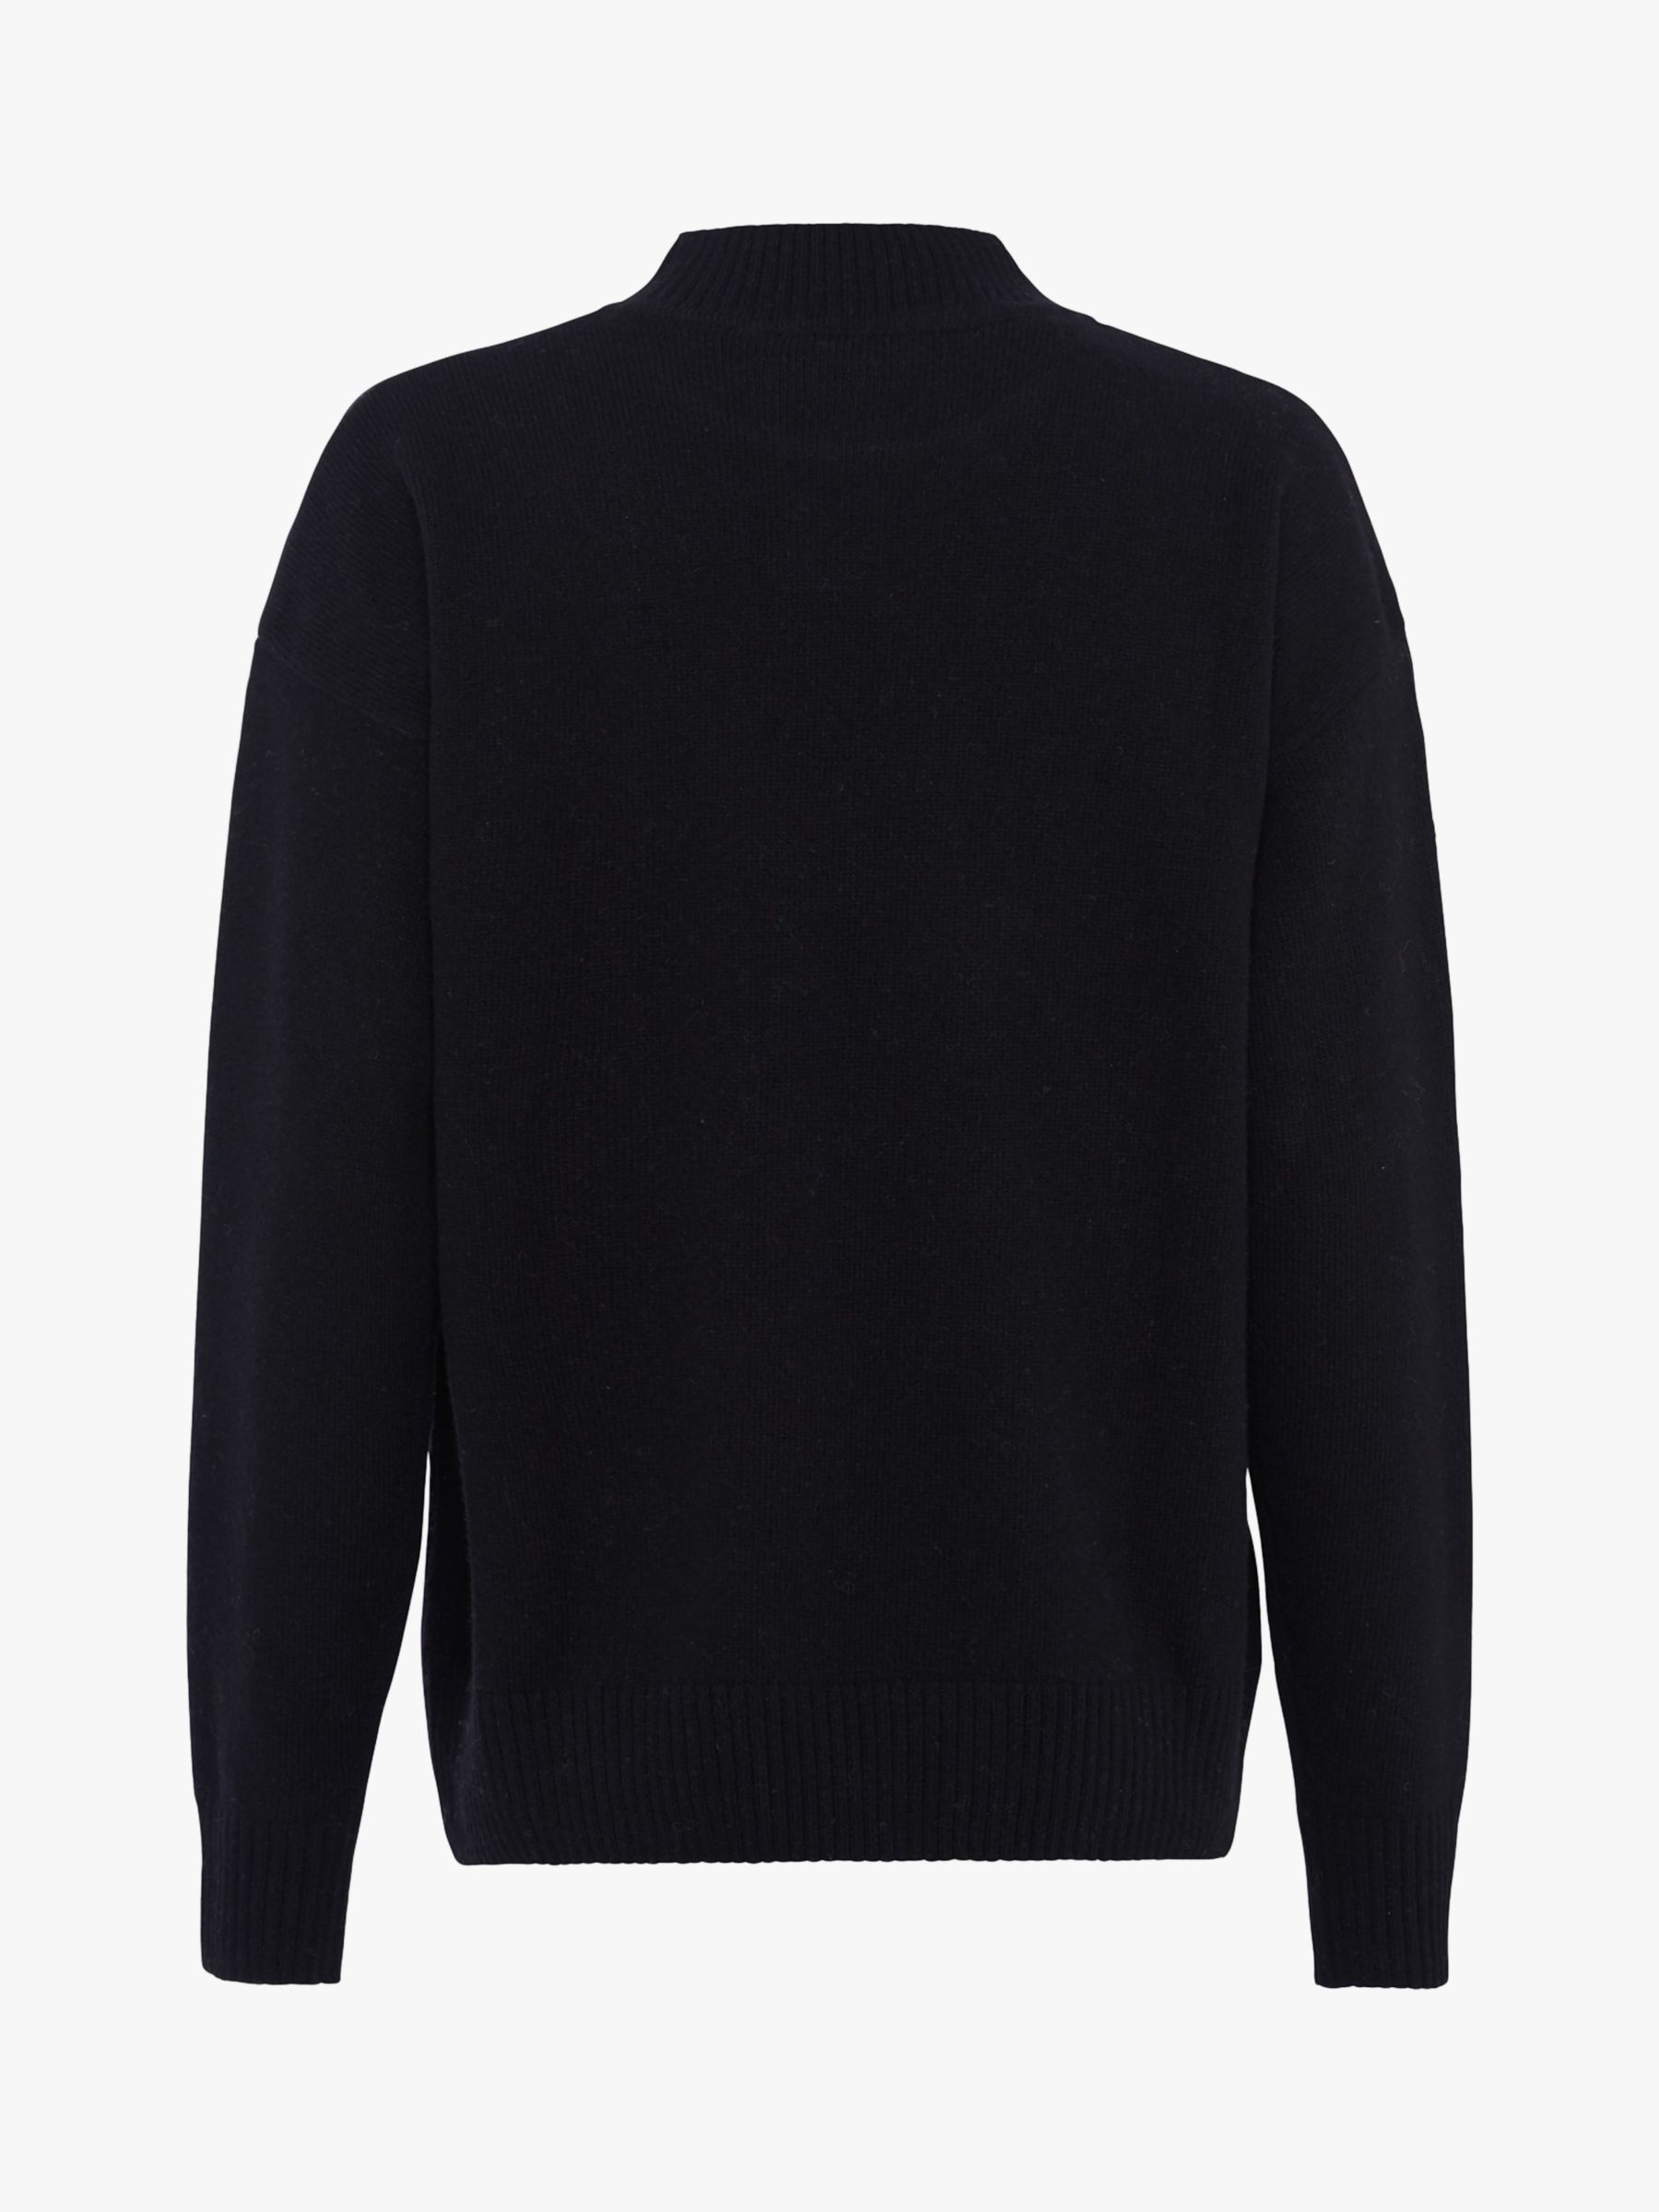 French Connection Tilda Embroidery Jumper, Black